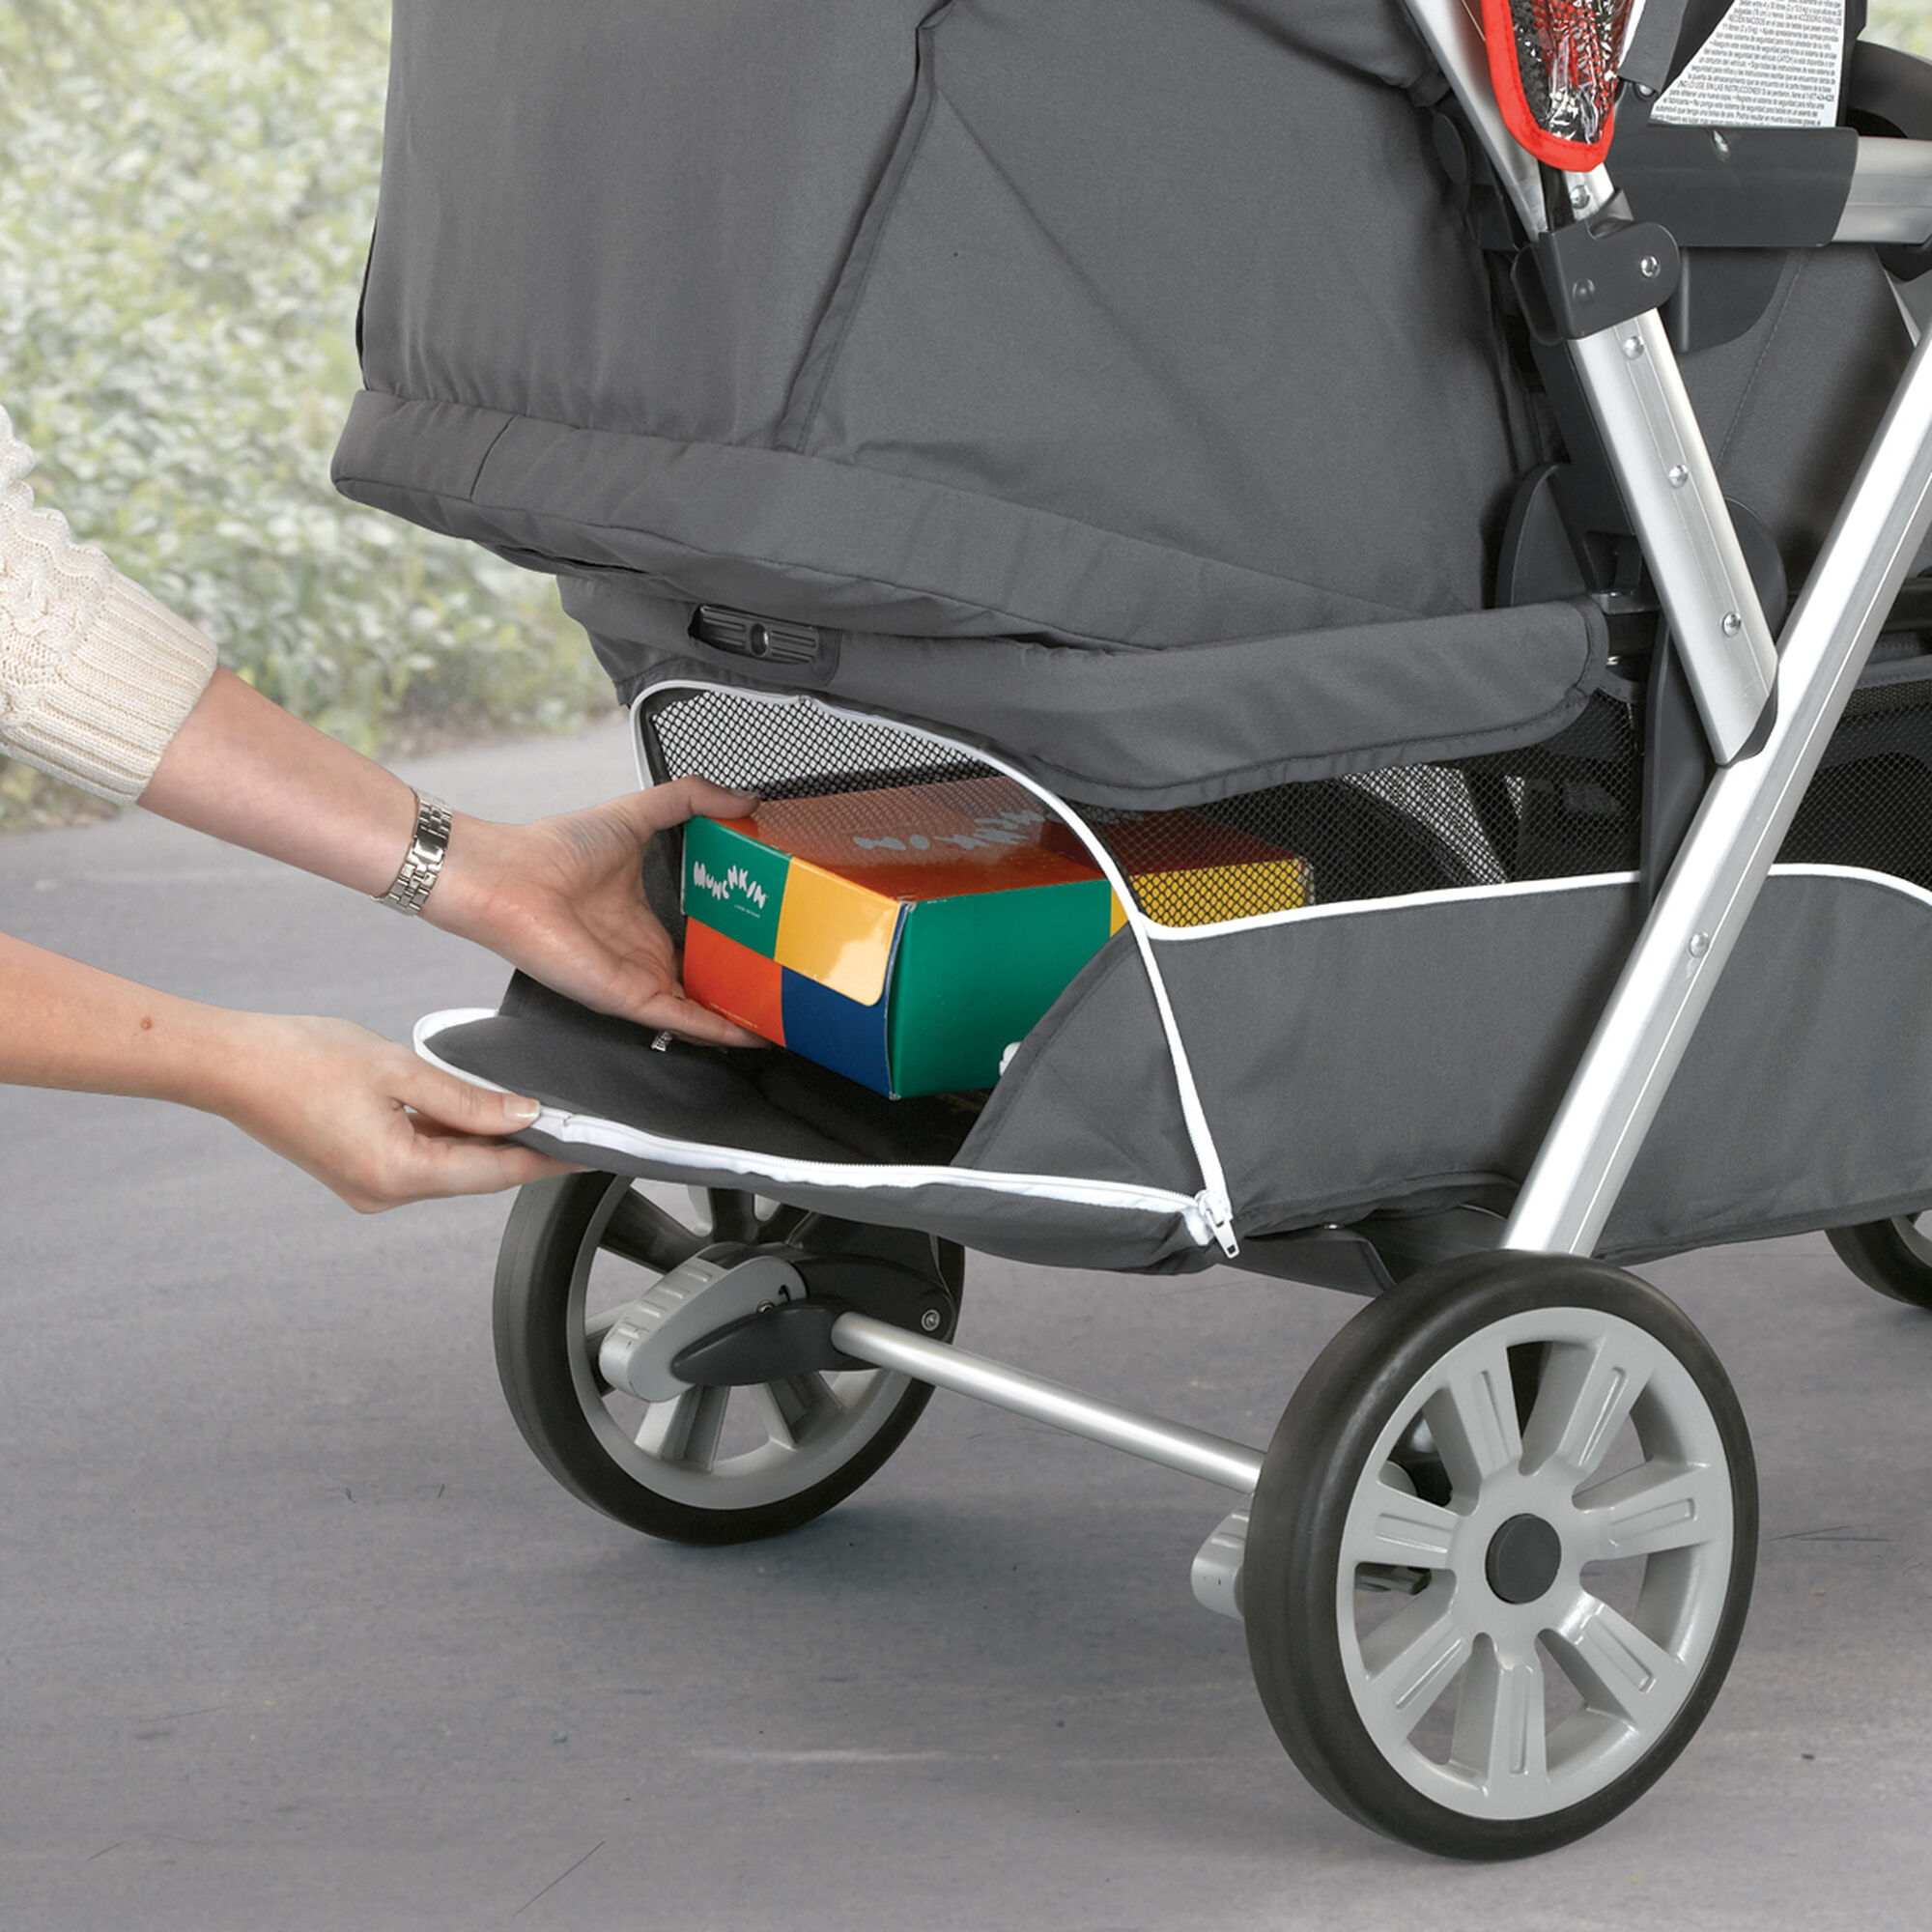 chicco cortina keyfit 30 travel system